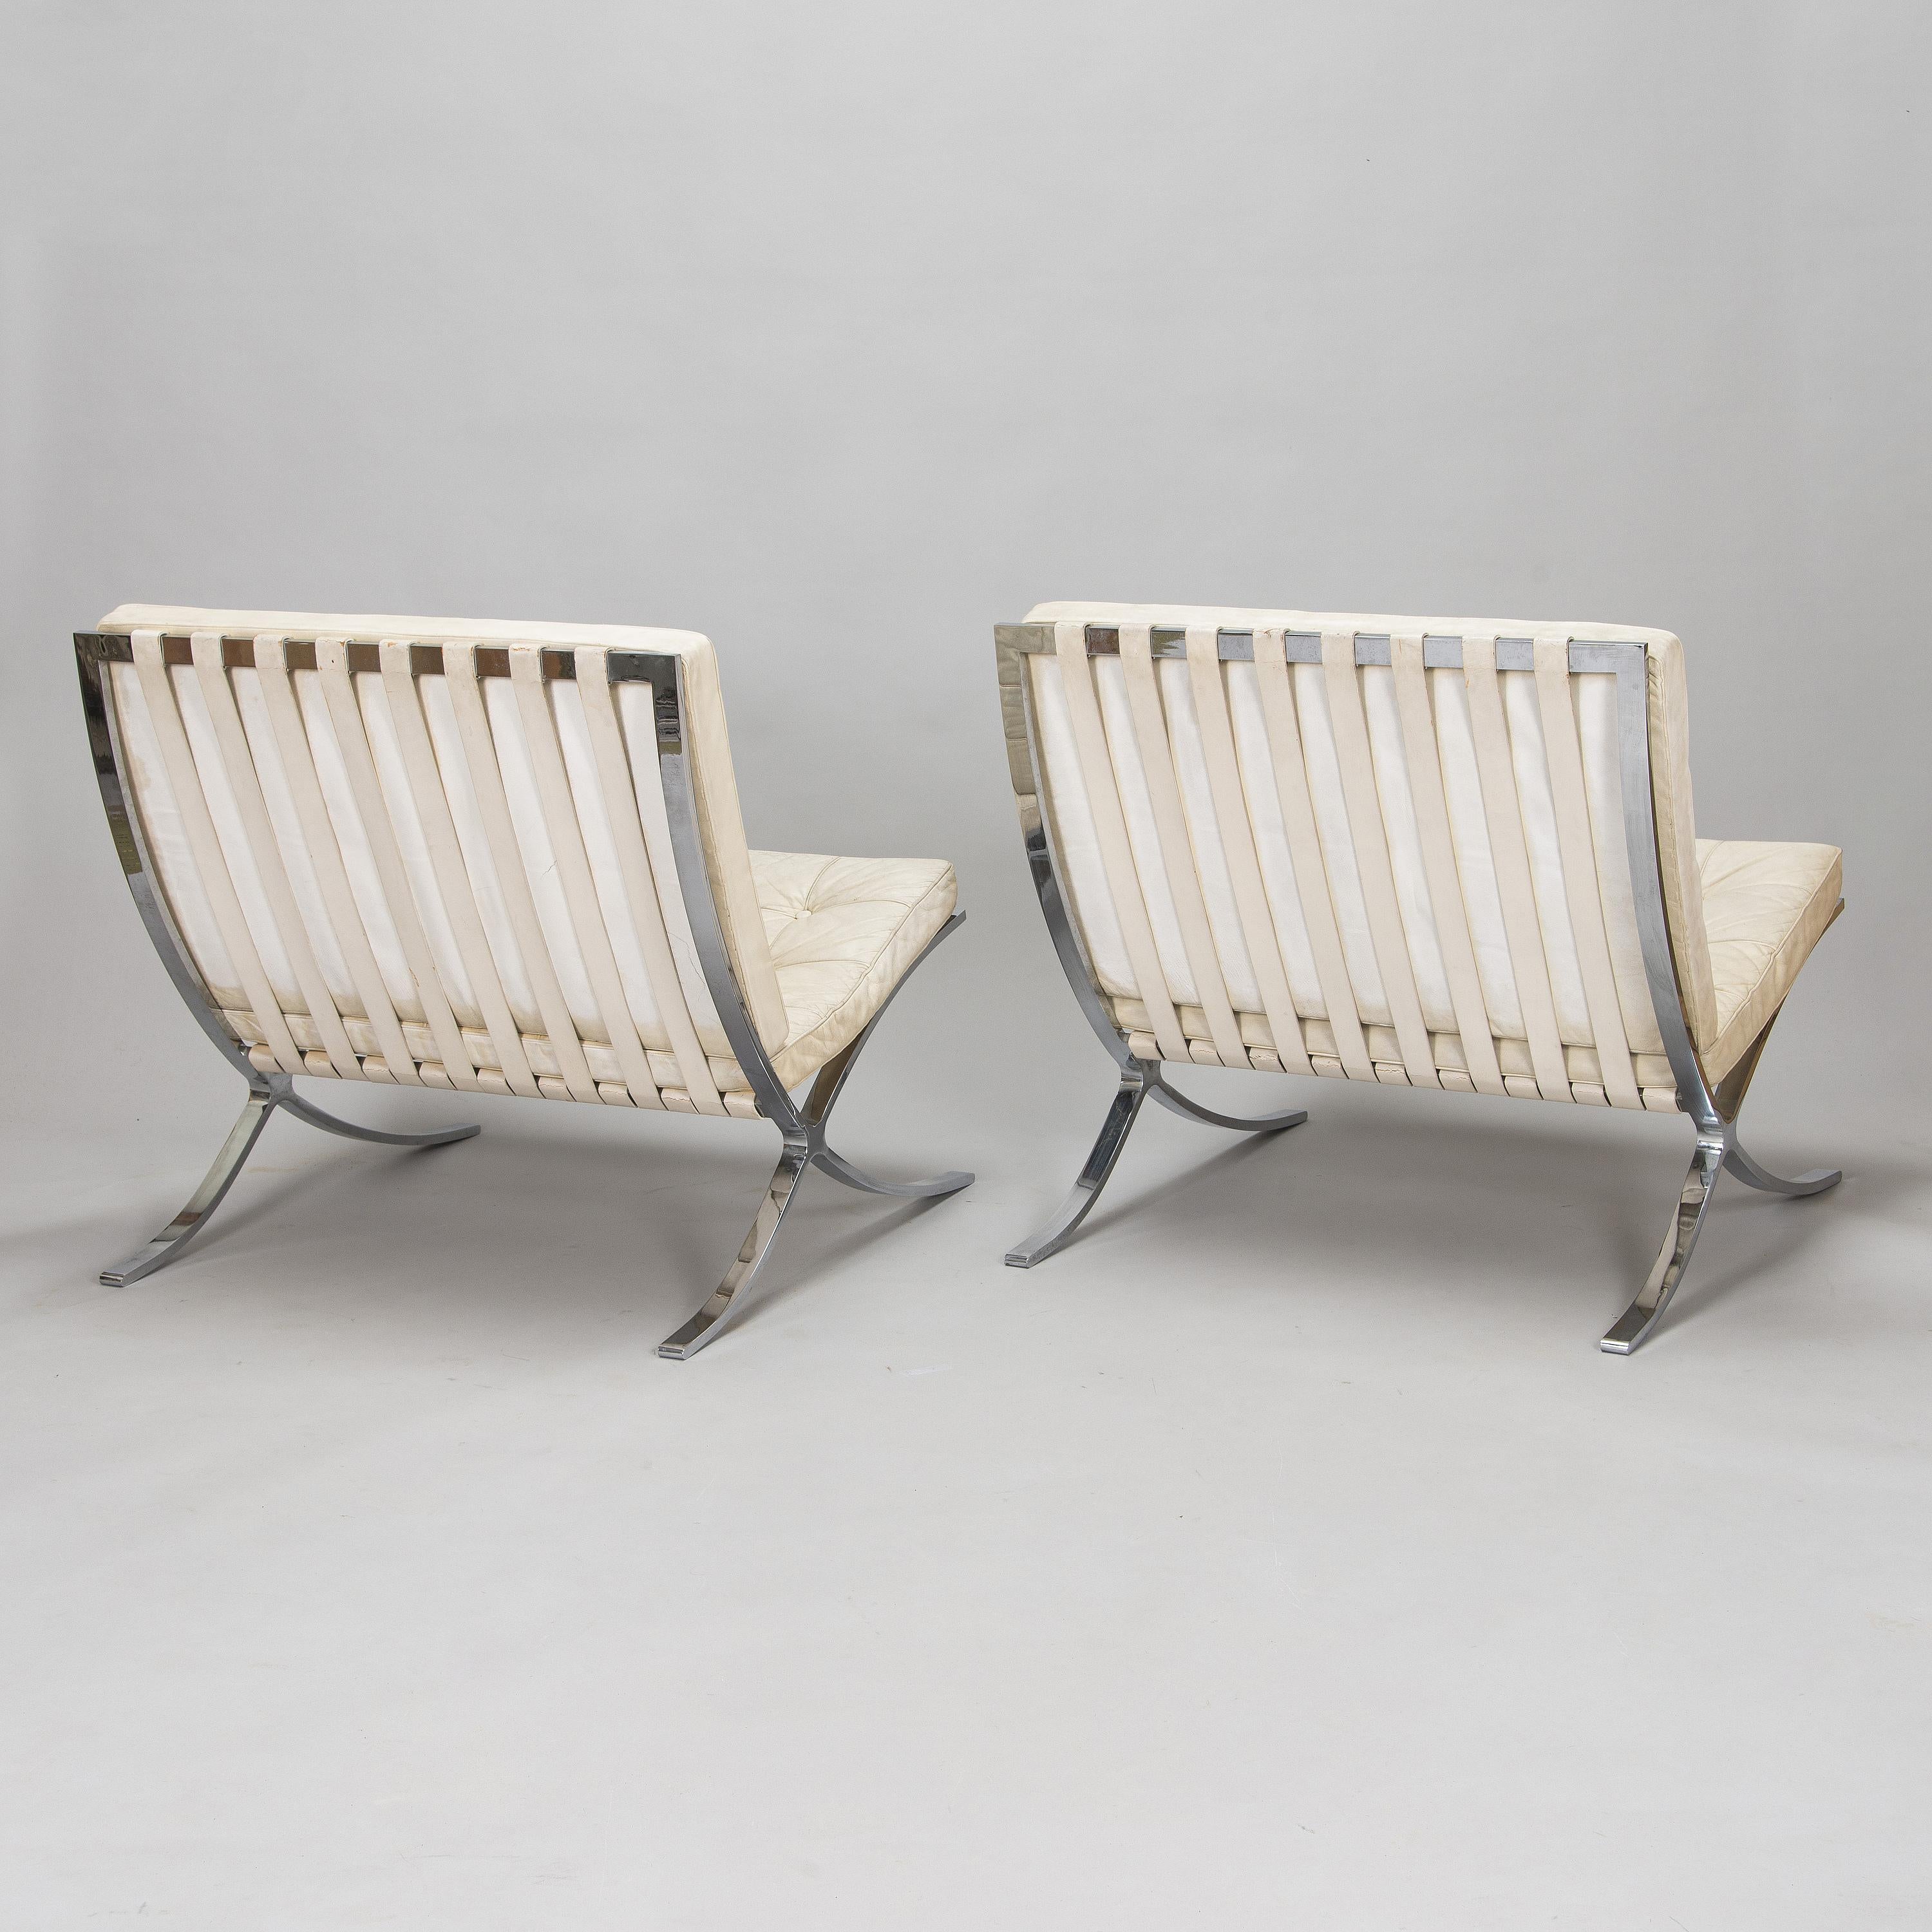 Ludwig Mies van der Rohe 'Barcelona' chair for Knoll made in USA 1965Chrome steel base , detachable cushions with bone white leather upholstery. This pais Is an original Mies Van der Rohe manufactured by Know inn the USA. The pair has been bought in